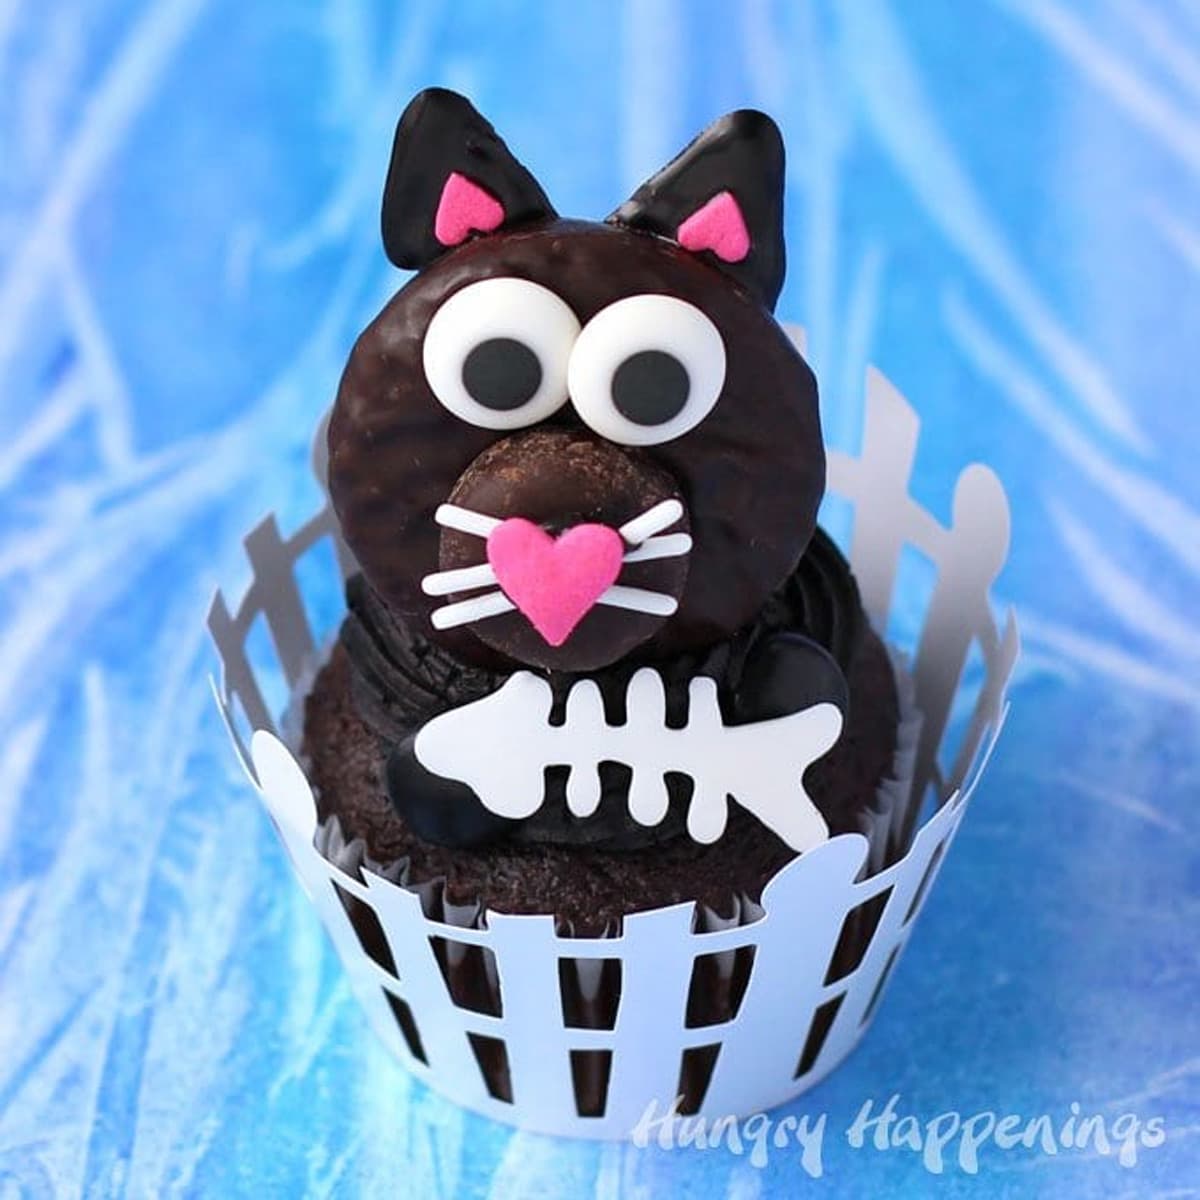 black cat cupcakes with Peppermint Patty cats served in a picket fence cupcake wrapper and decorated with white chocolate fish bones.